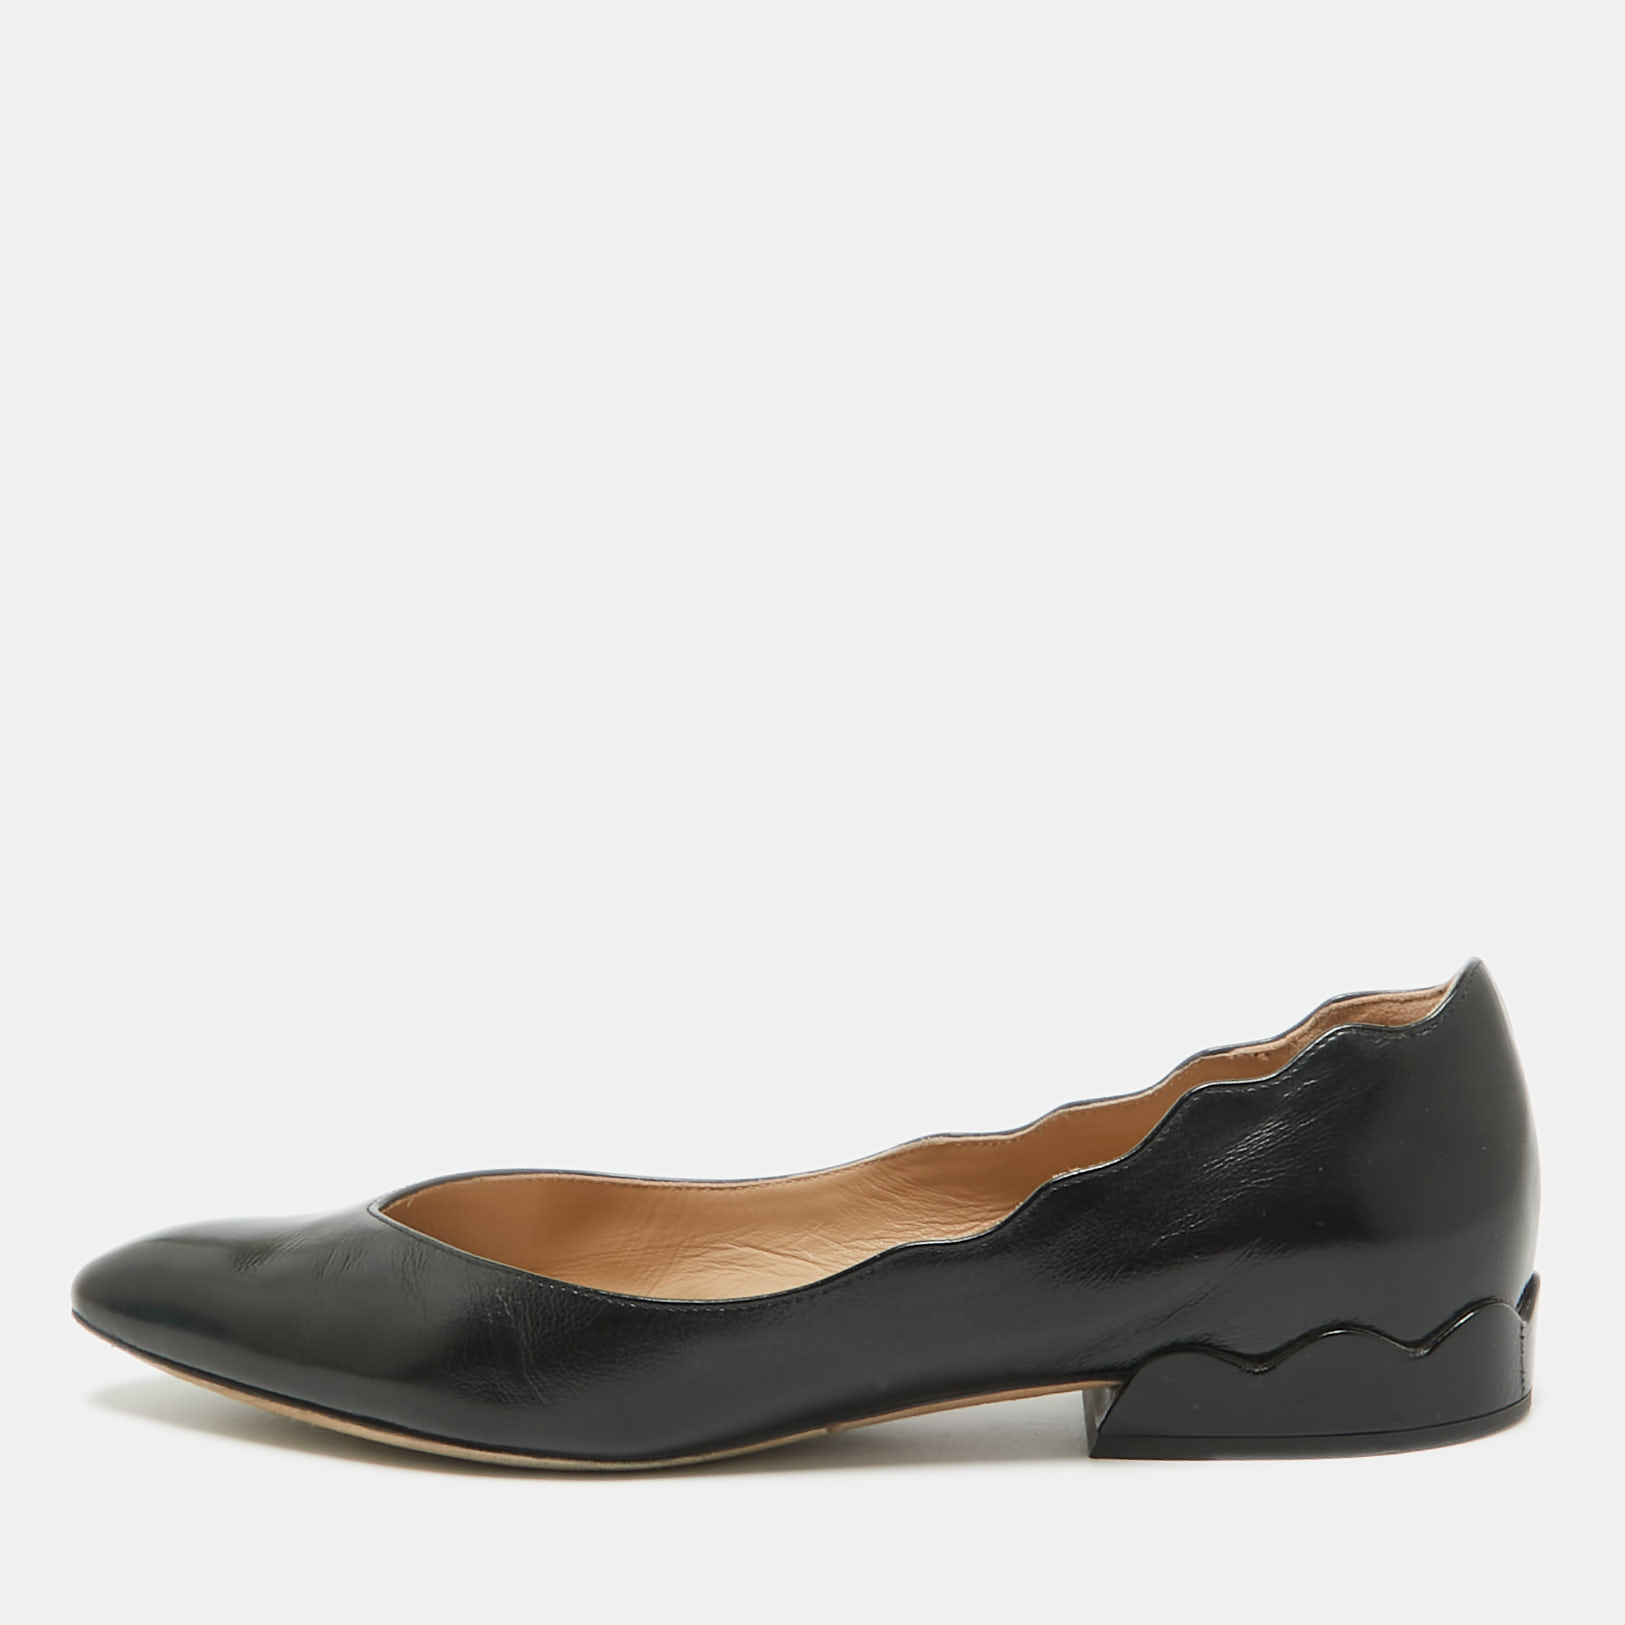 

Chloe Black Leather Pointed Toe Ballet Flats Size